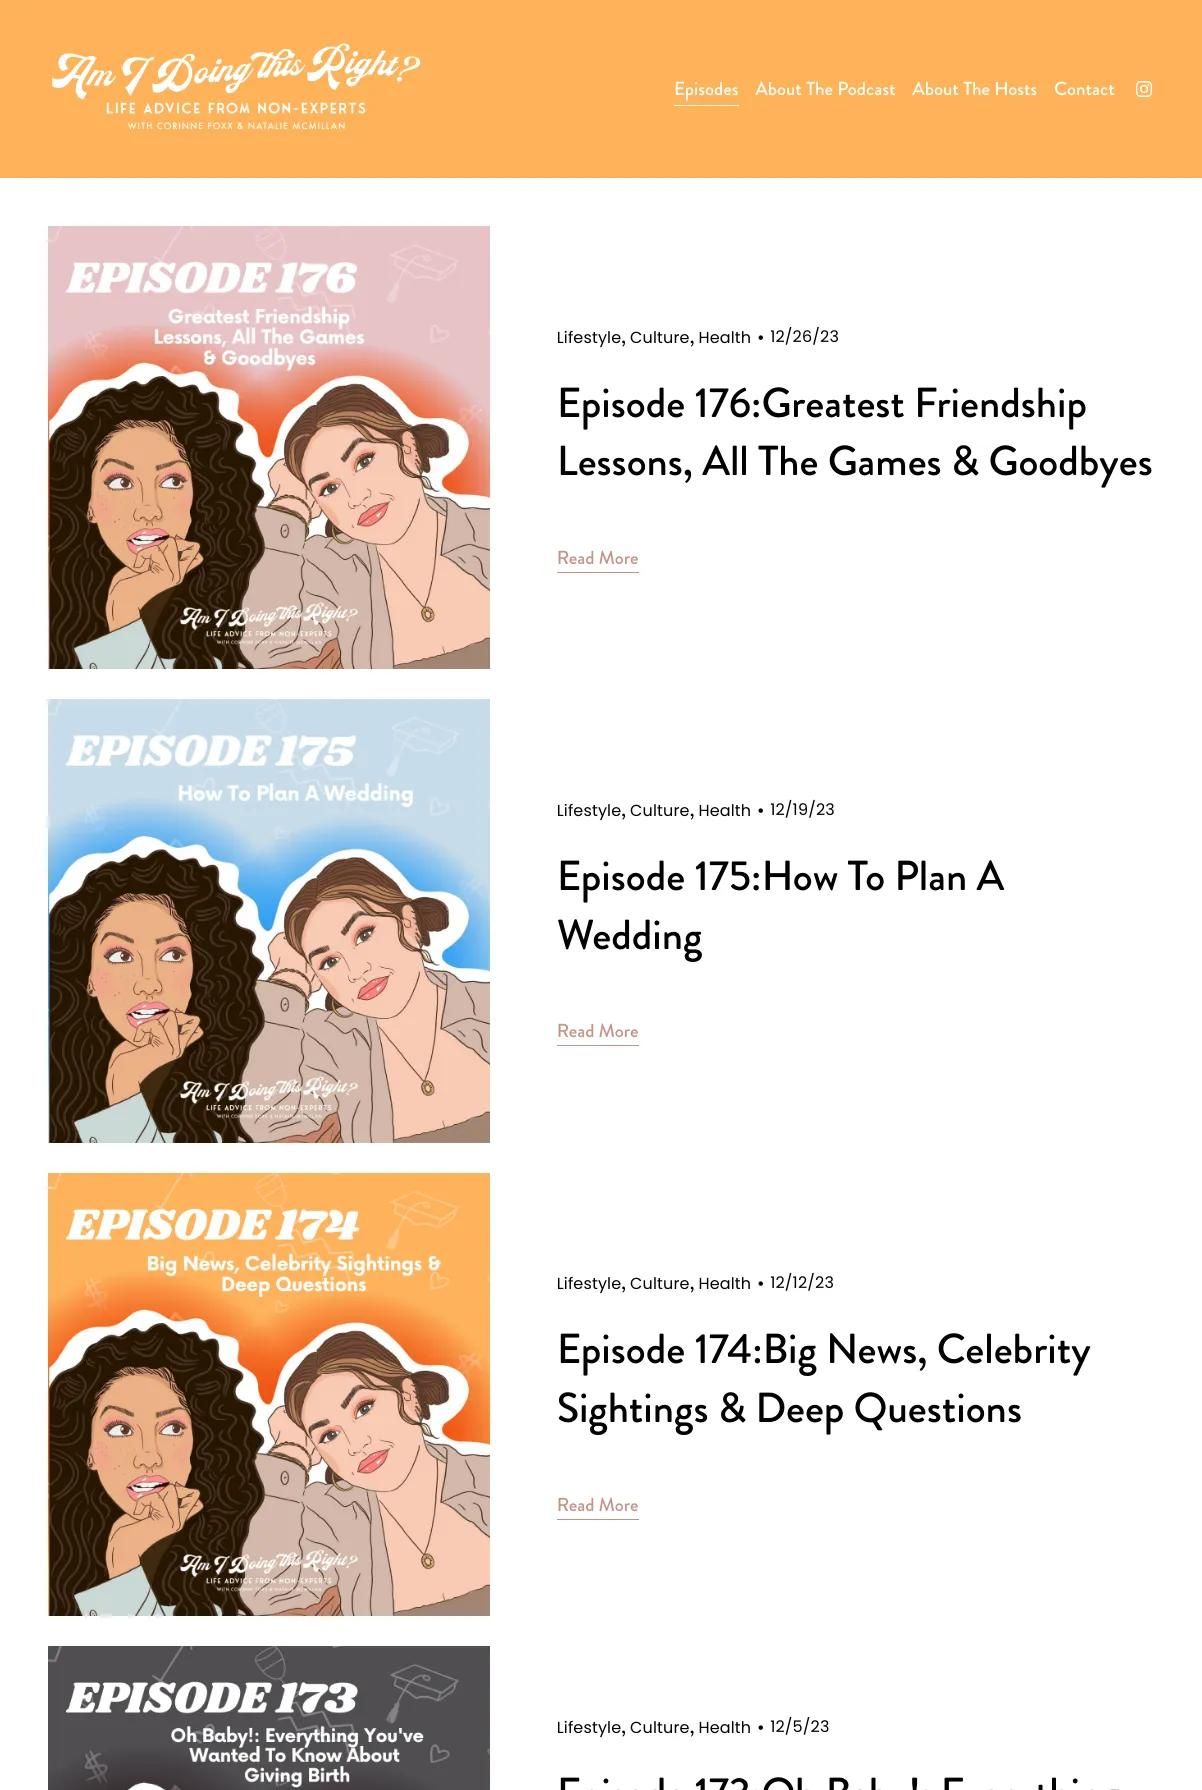 Screenshot 2 of Am I Doing This Right (Example Squarespace Podcast Website)